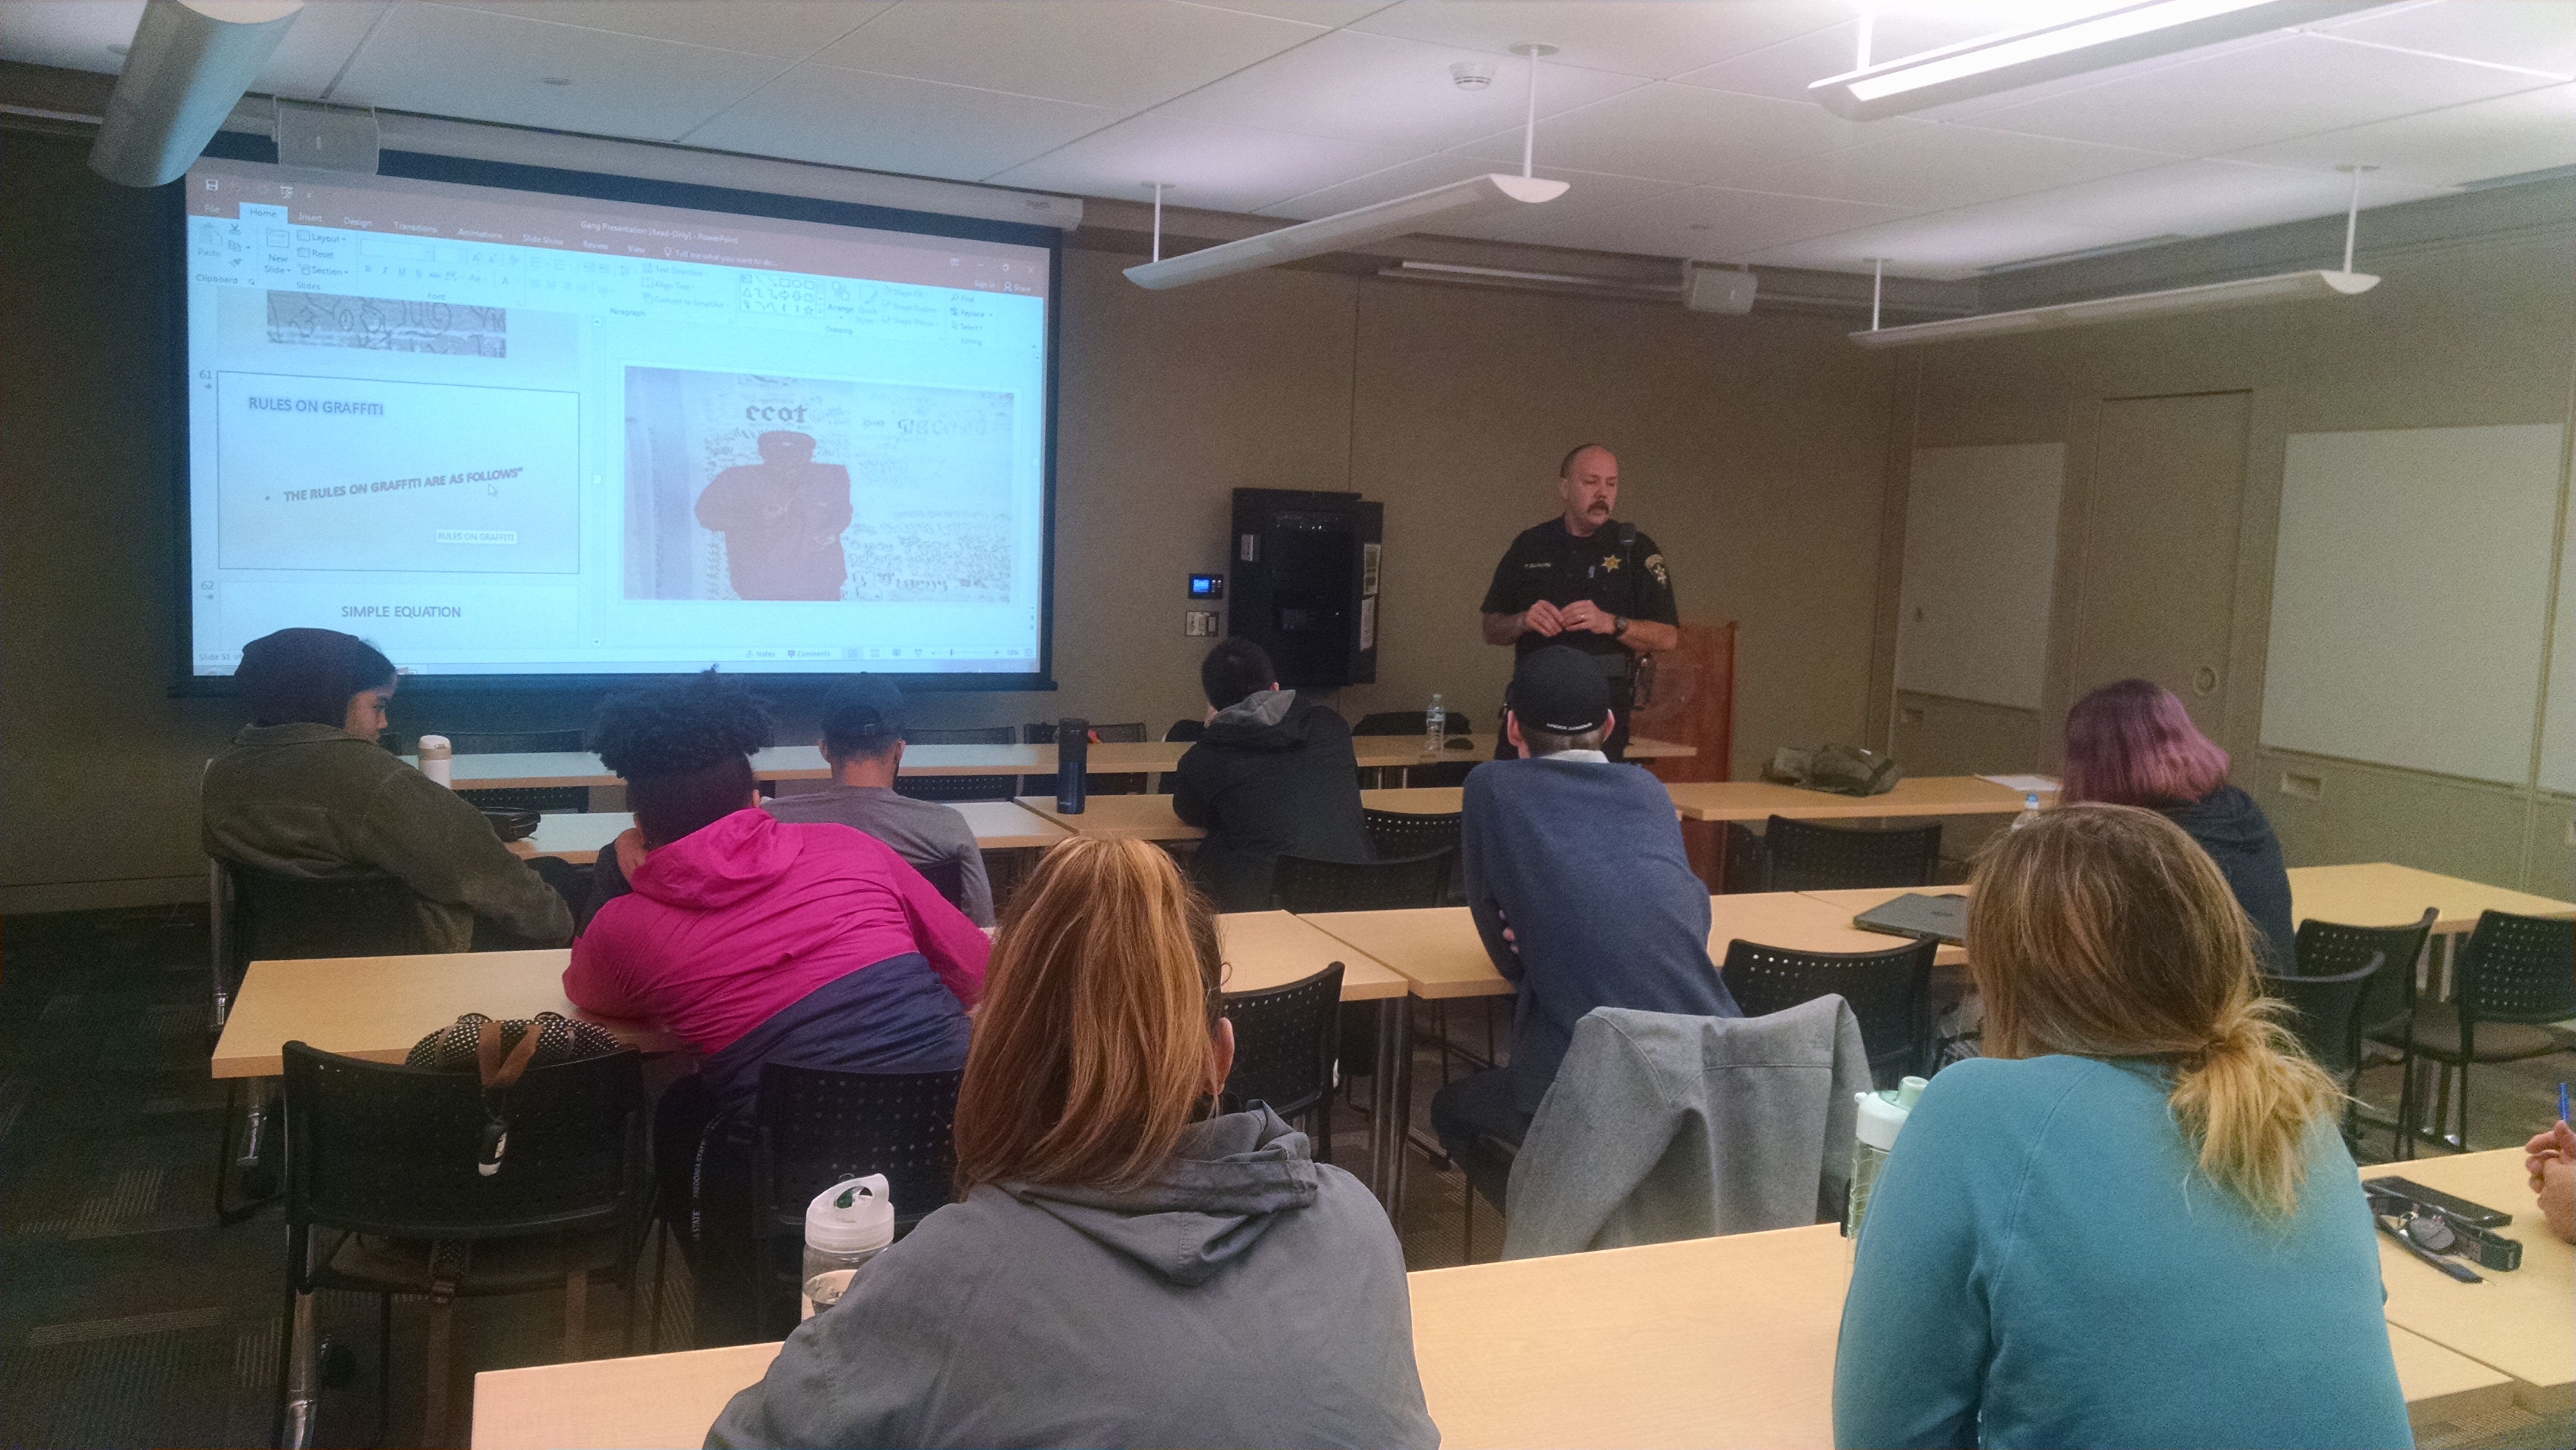 Correctional Officer Thomas Gilmore giving a talk to club members. Officer Gilmore is the Gang Intelligence Officer for the Chautauqua County Sheriff's Office - Correction's Division.